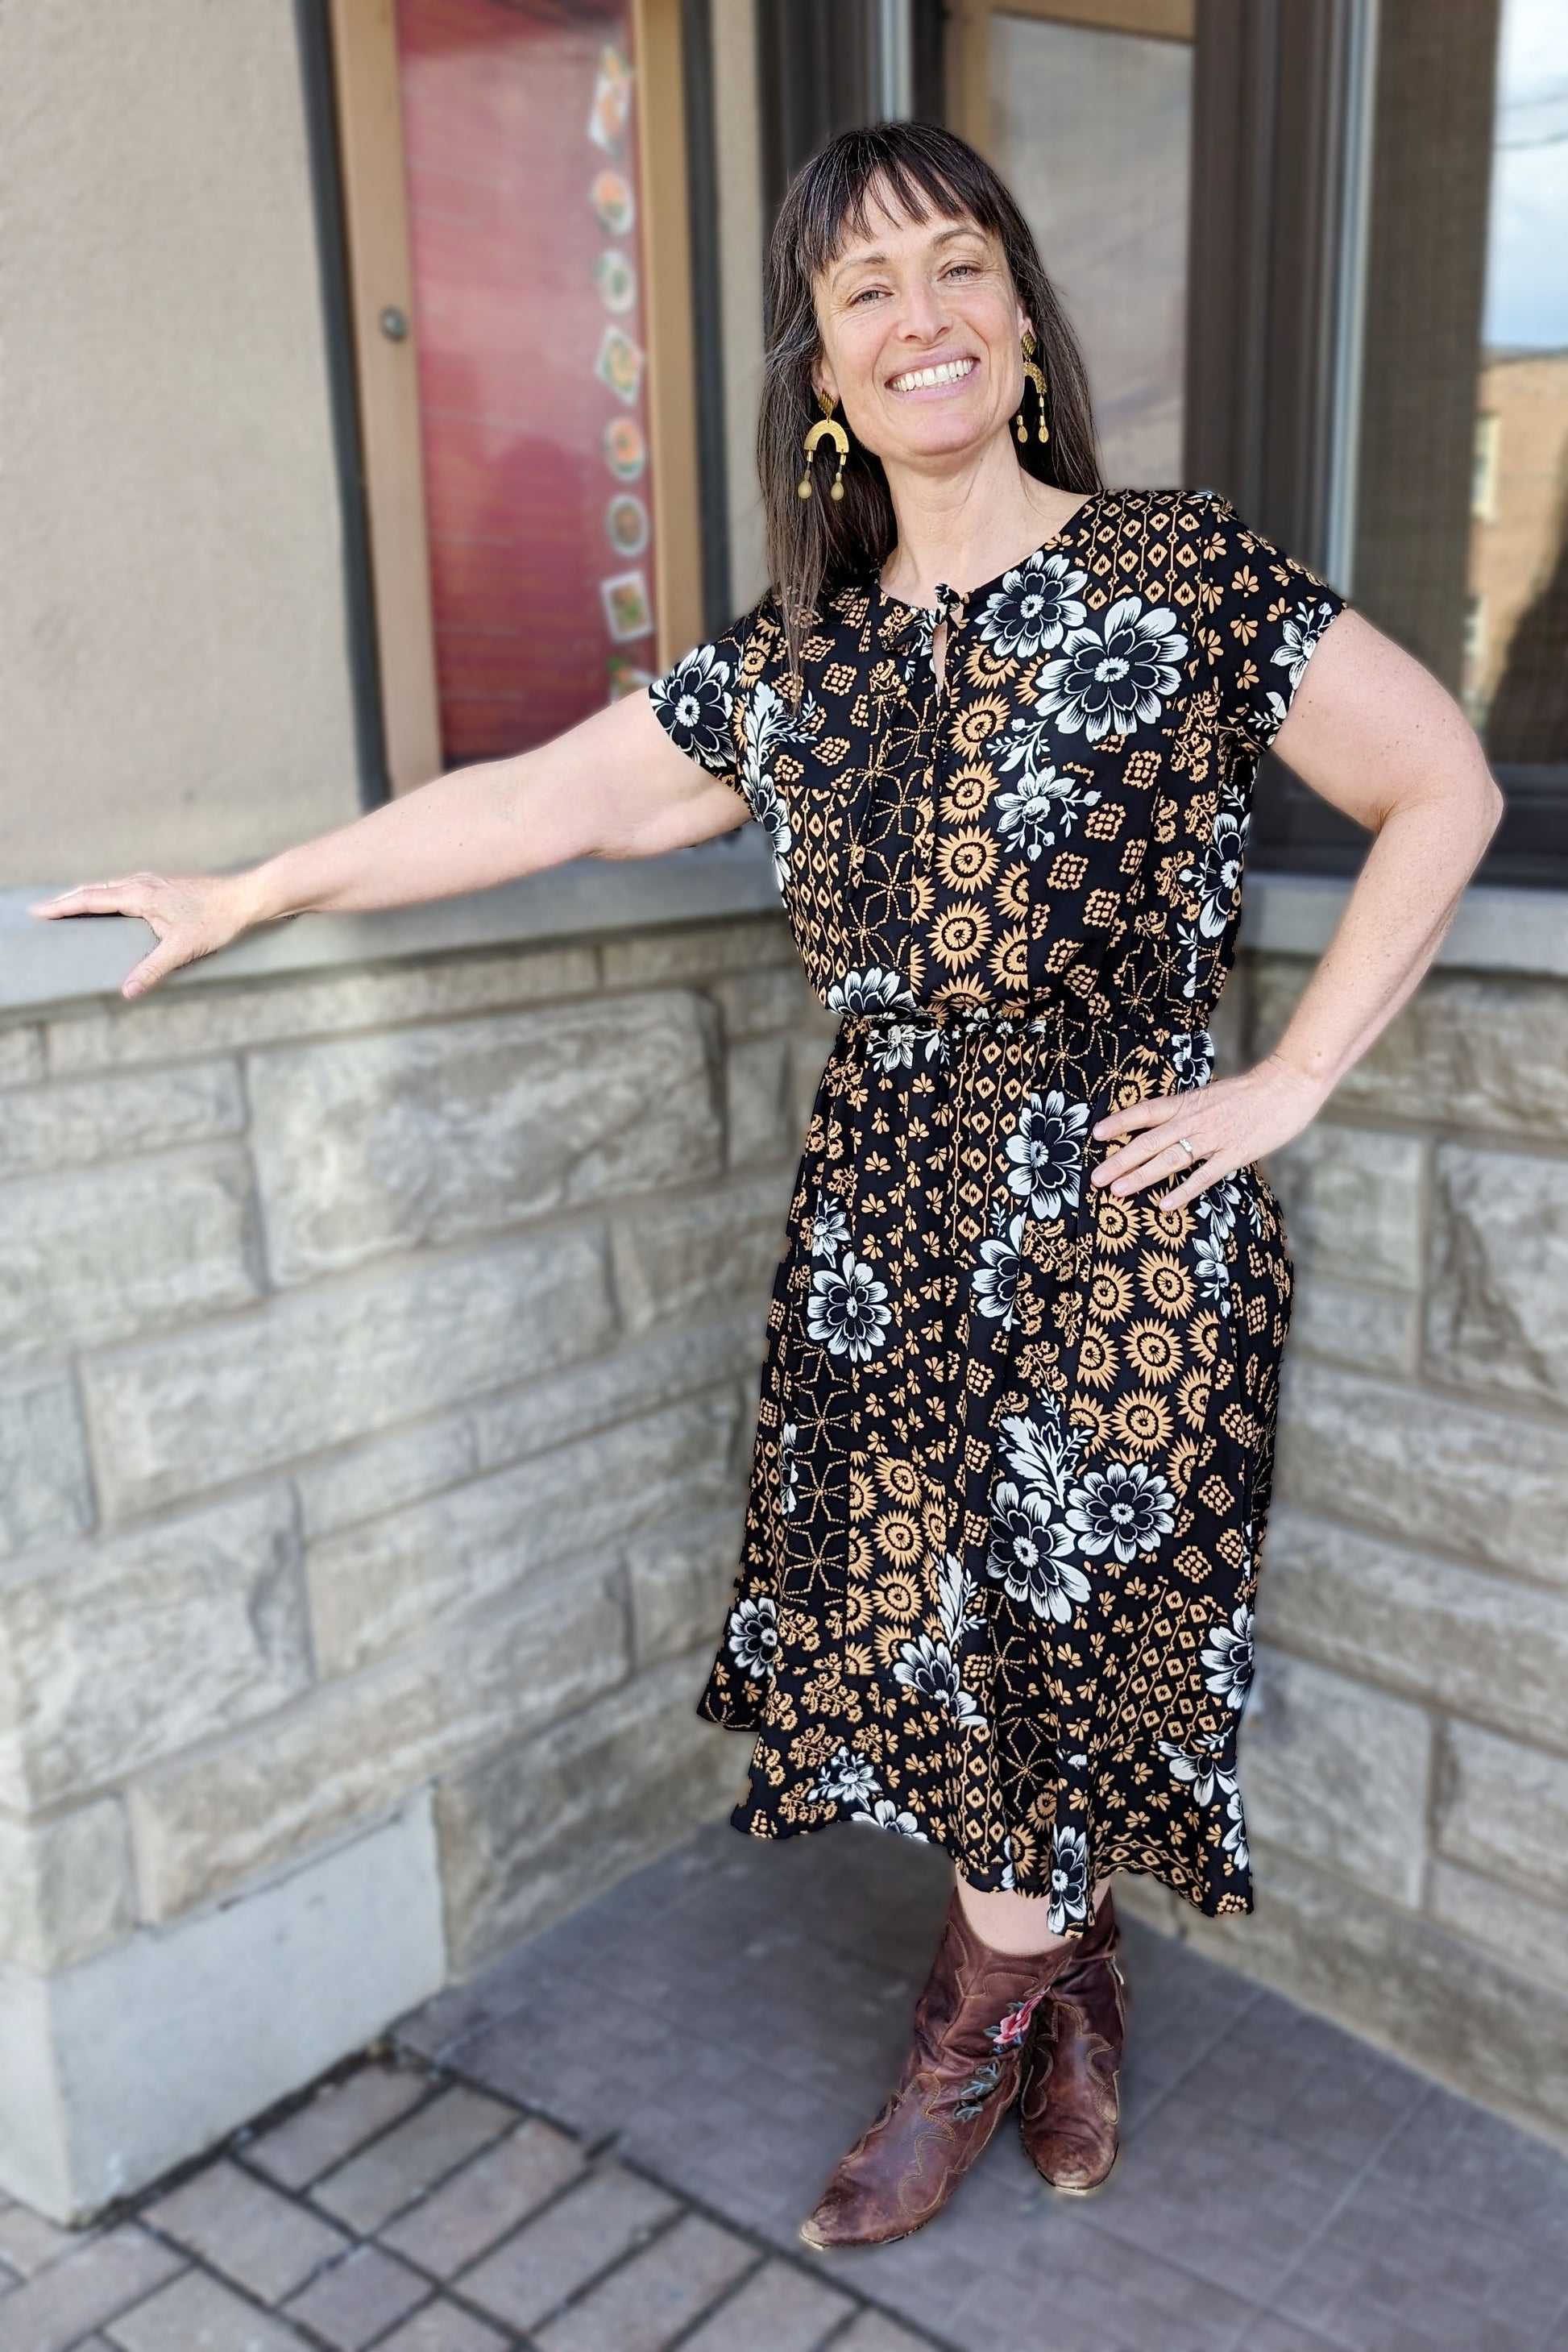 Aurore Dress by Cherry Bobin, Sand/White floral on black background, short sleeves, round neck with cut-out and tie detail, elastic waist, below the knee, sizes XS to L, made in Montreal